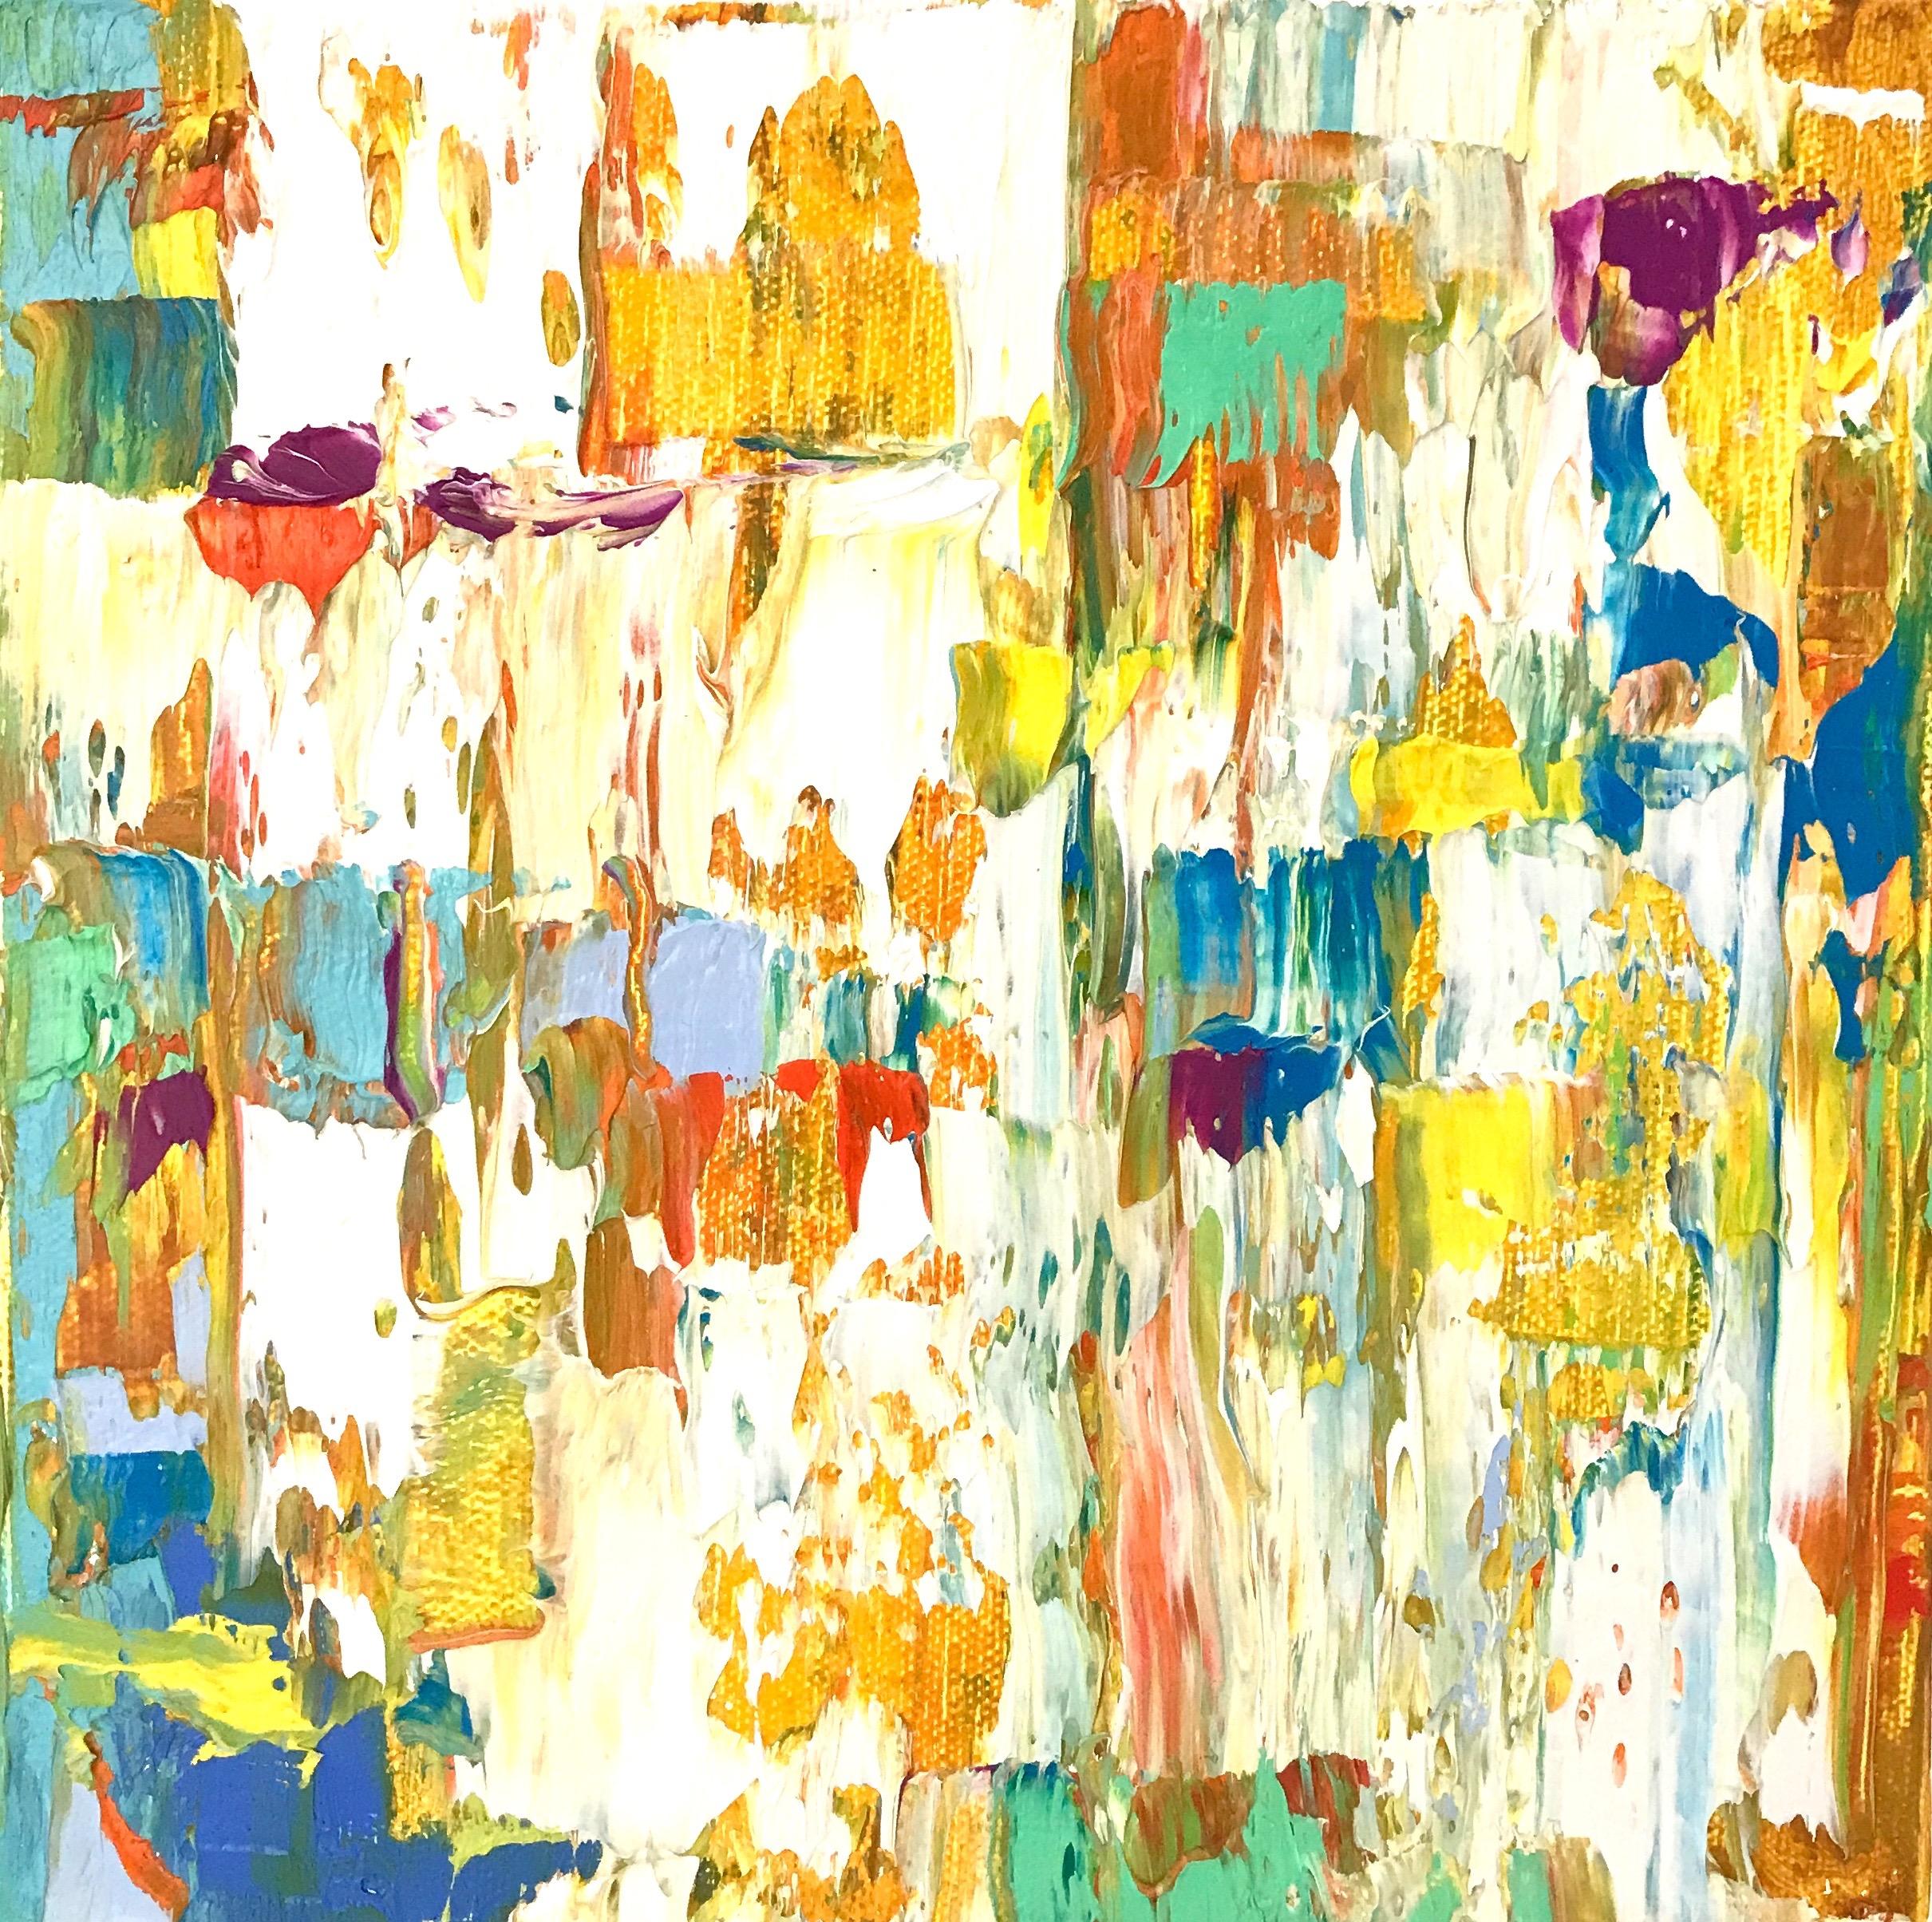 Linda Holt Abstract Painting - "Small Abstract #116" Orange, Blue, Green, White, Yellow, Red Expressionist Work